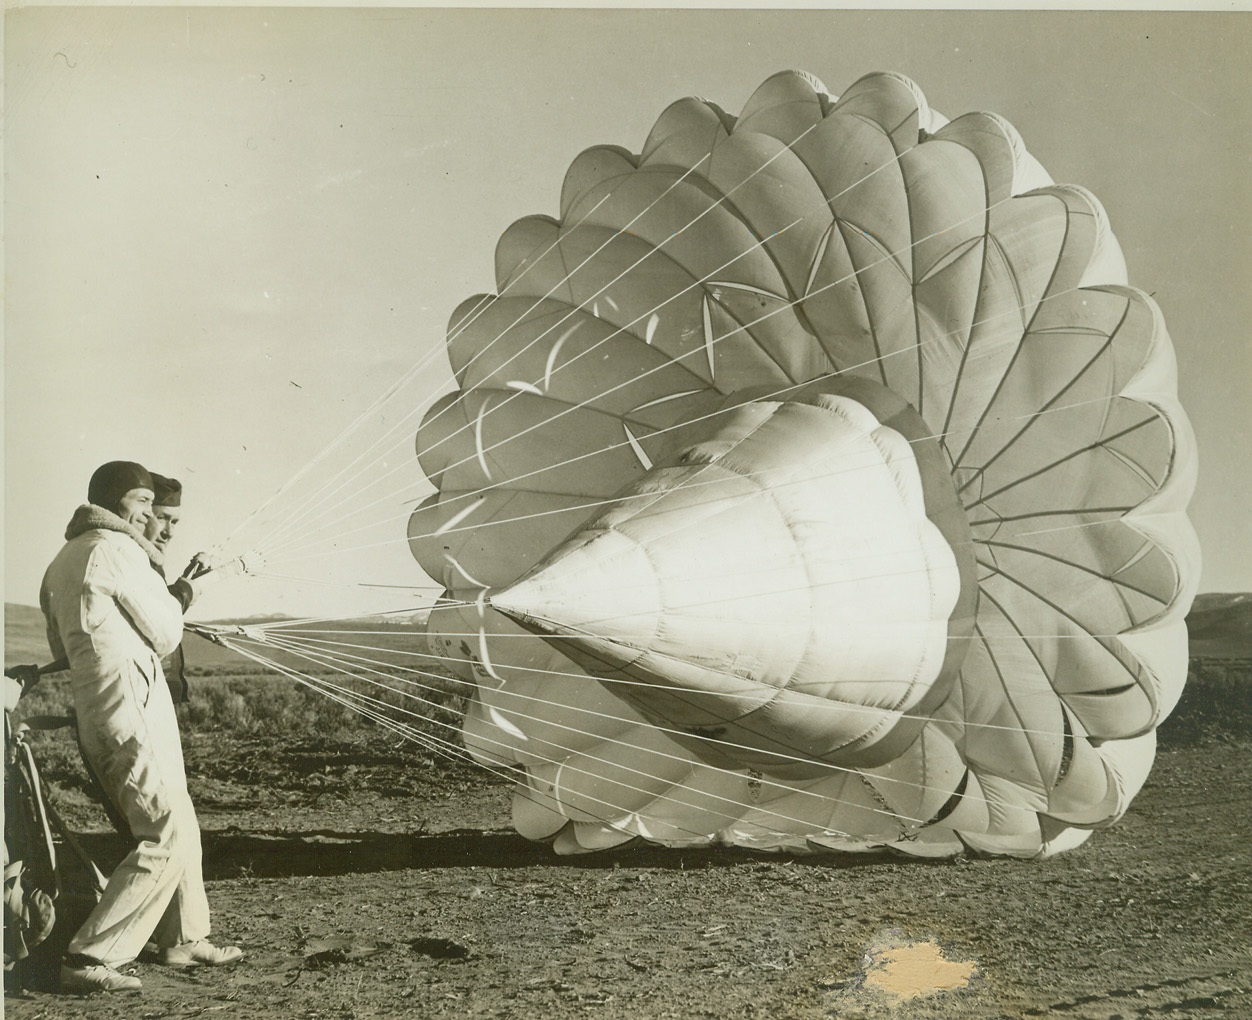 Army Tests New Type Parachute, 3/8/1942. Reno, Nev.—Utilizing a center cone (illegible portion here), opening shock and reduce speed of (illegible portion), a new type parachute is shown after its first Army tests by Jumper George Waltz. In foreground is the inventor, Dr. Christian Wolf. Waltz made the first test jump from 2700 feet. Credit: ACME;